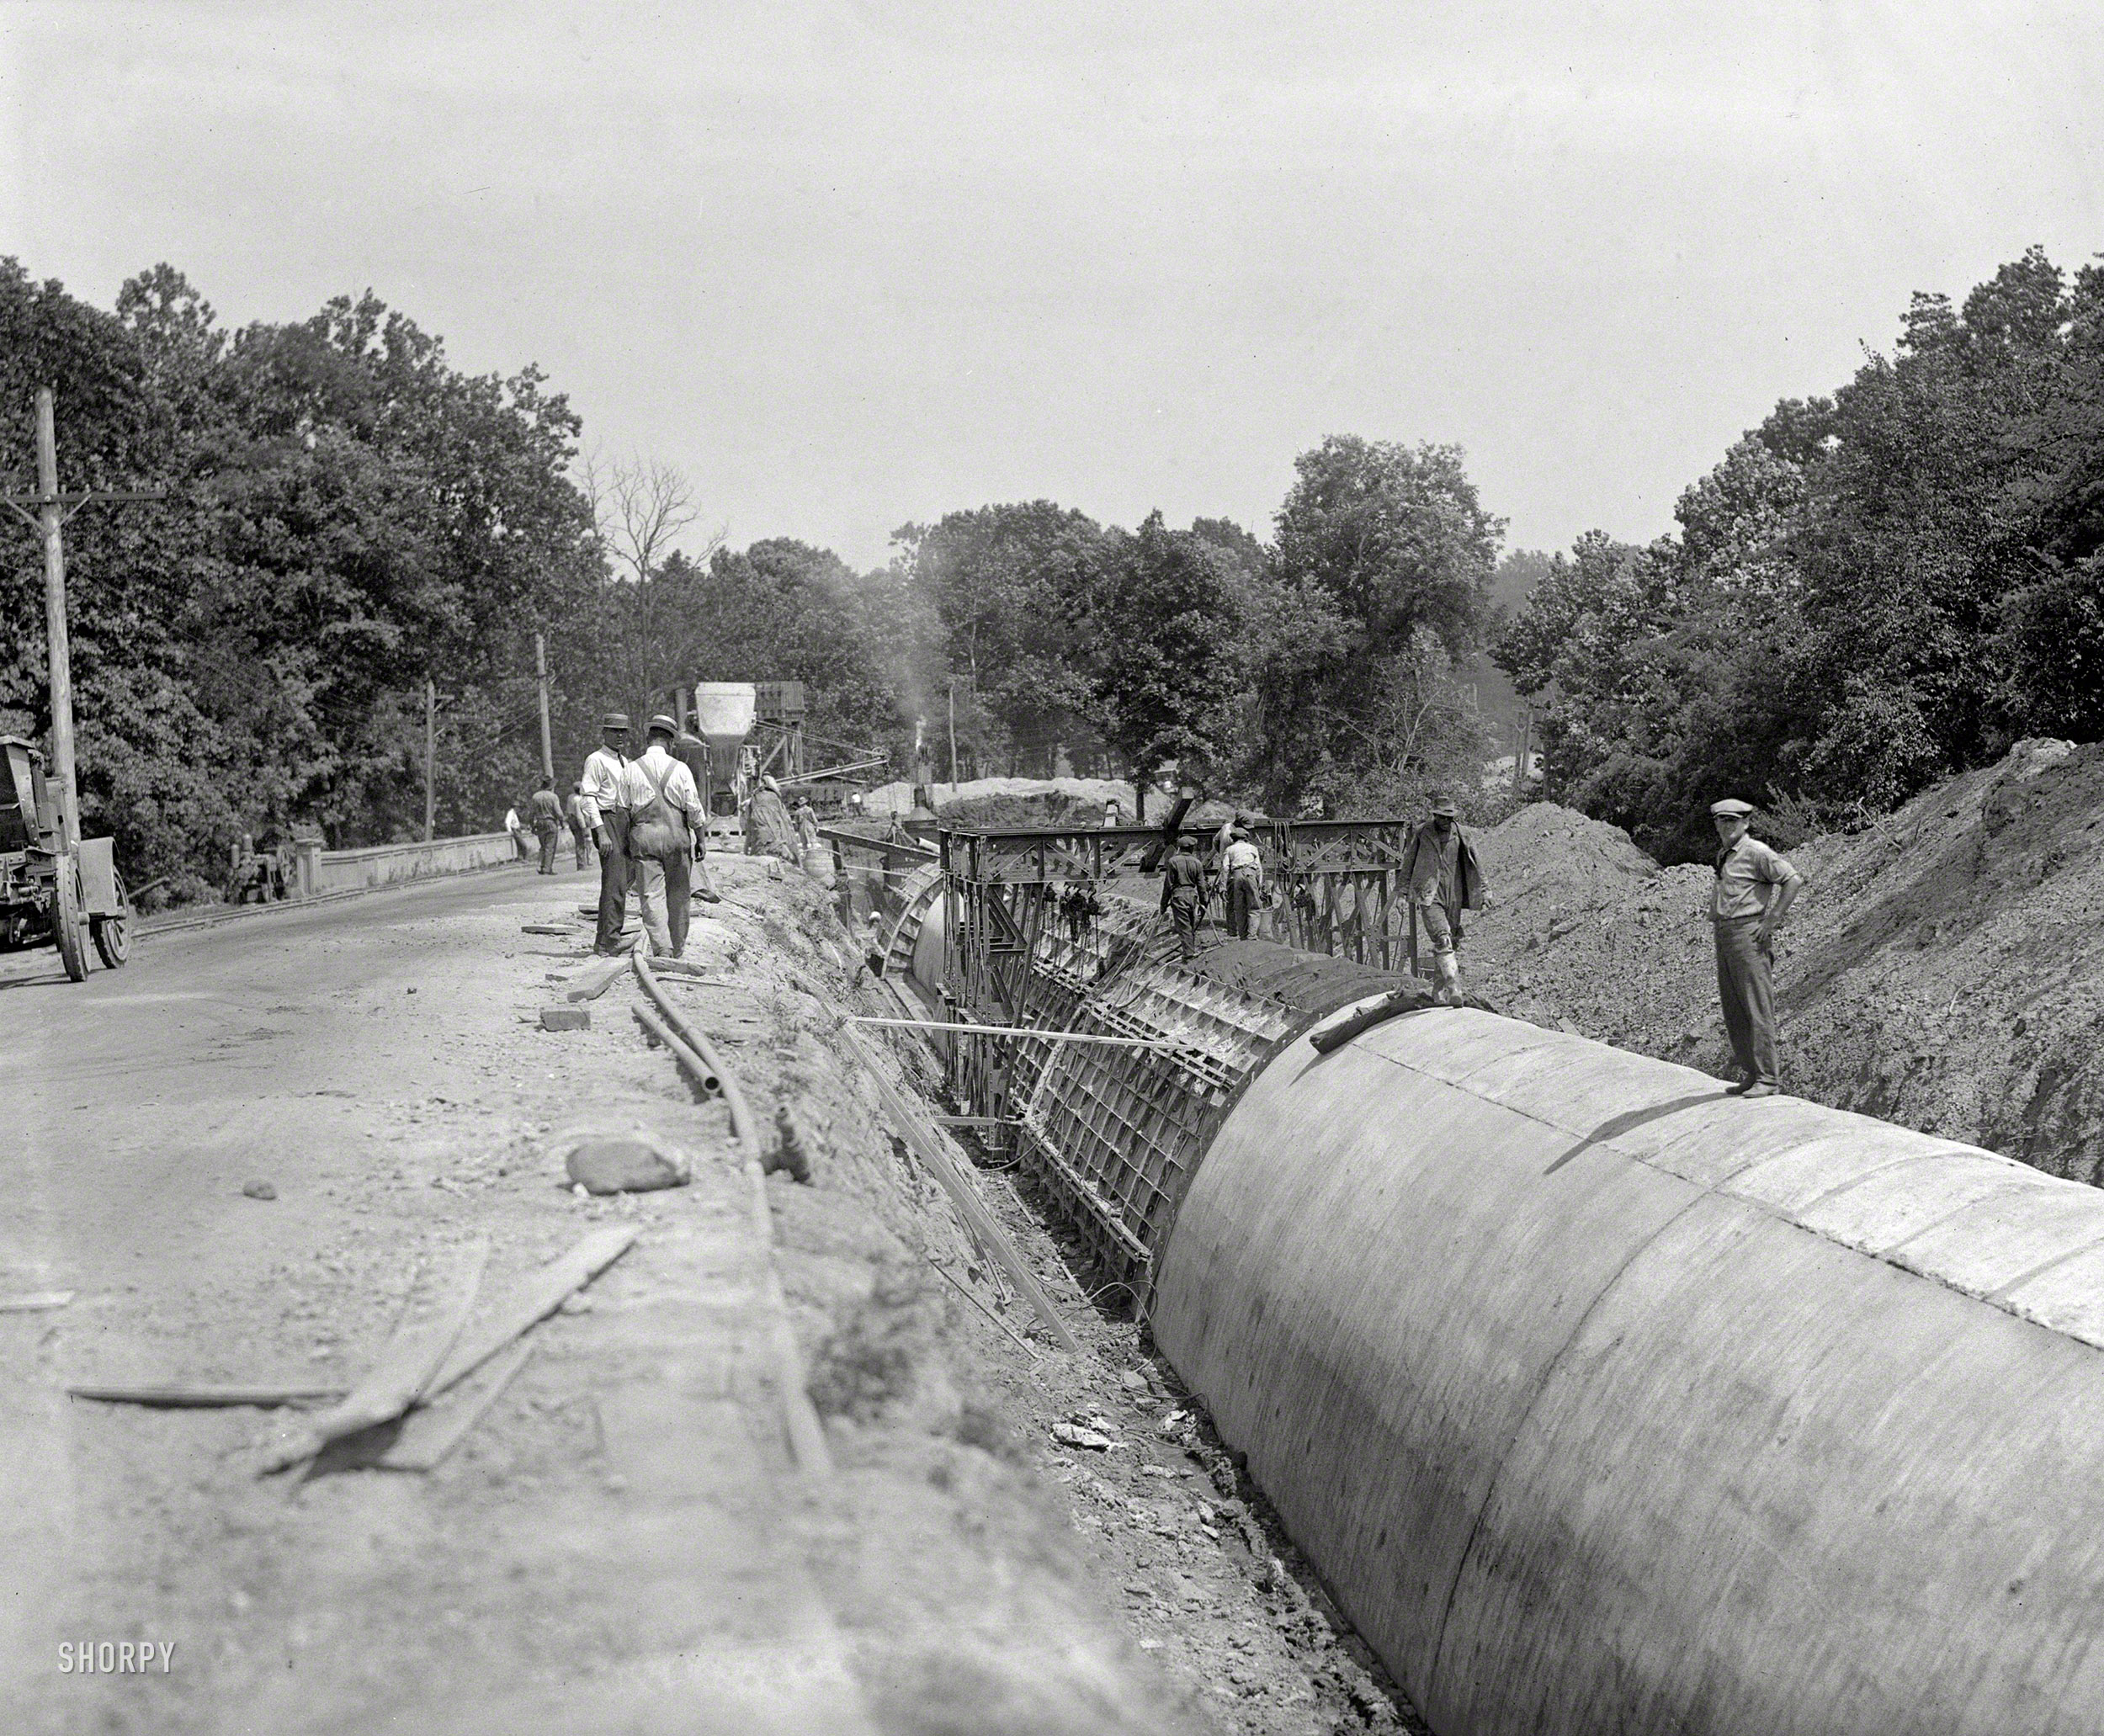 July 21, 1923. "Water conduit." Part of the Washington, D.C., aqueduct system seen here, along what used to be called Conduit Road. View full size.